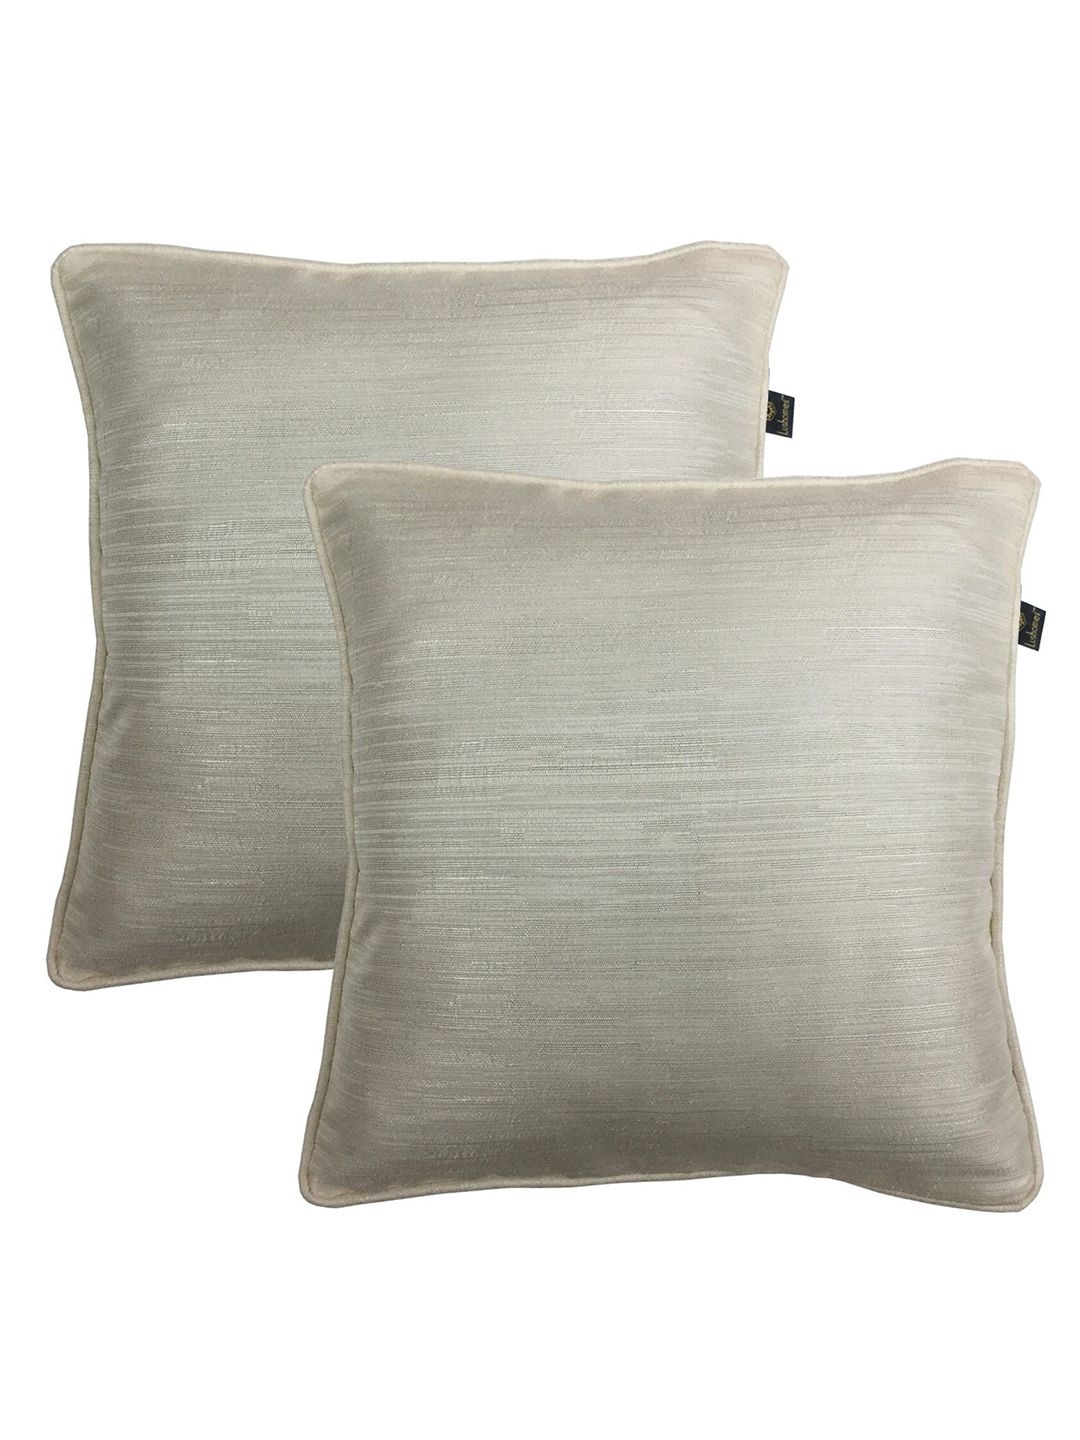 Lushomes Pack Of 2 White Square Cushion Covers Price in India